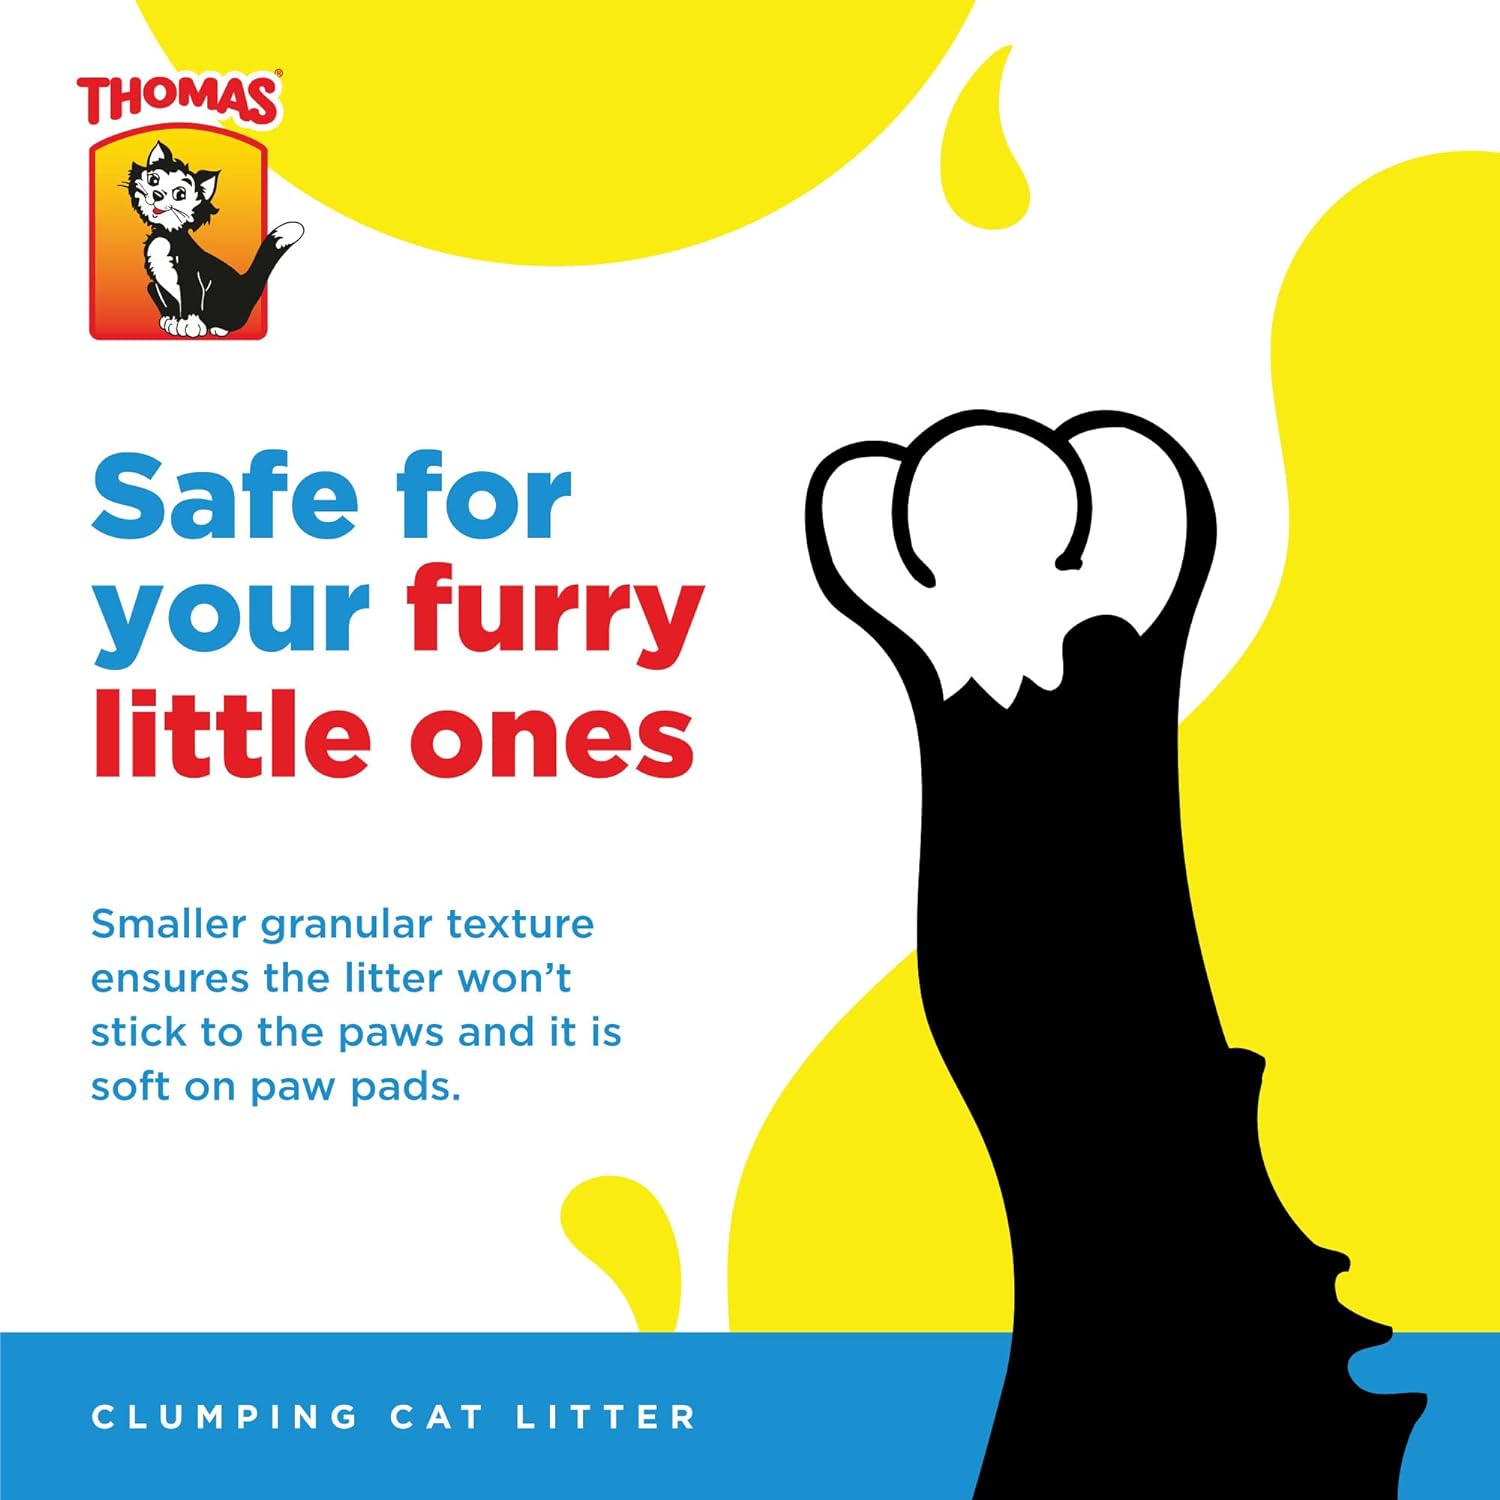 Thomas Cat Litter, Natural Minerals Litter Sand, it's Non-Clumping and Highly Absorbent Nature Ensures Your Cat to Come Back to its Cat Litter Box with Comfort, Bag of 16L